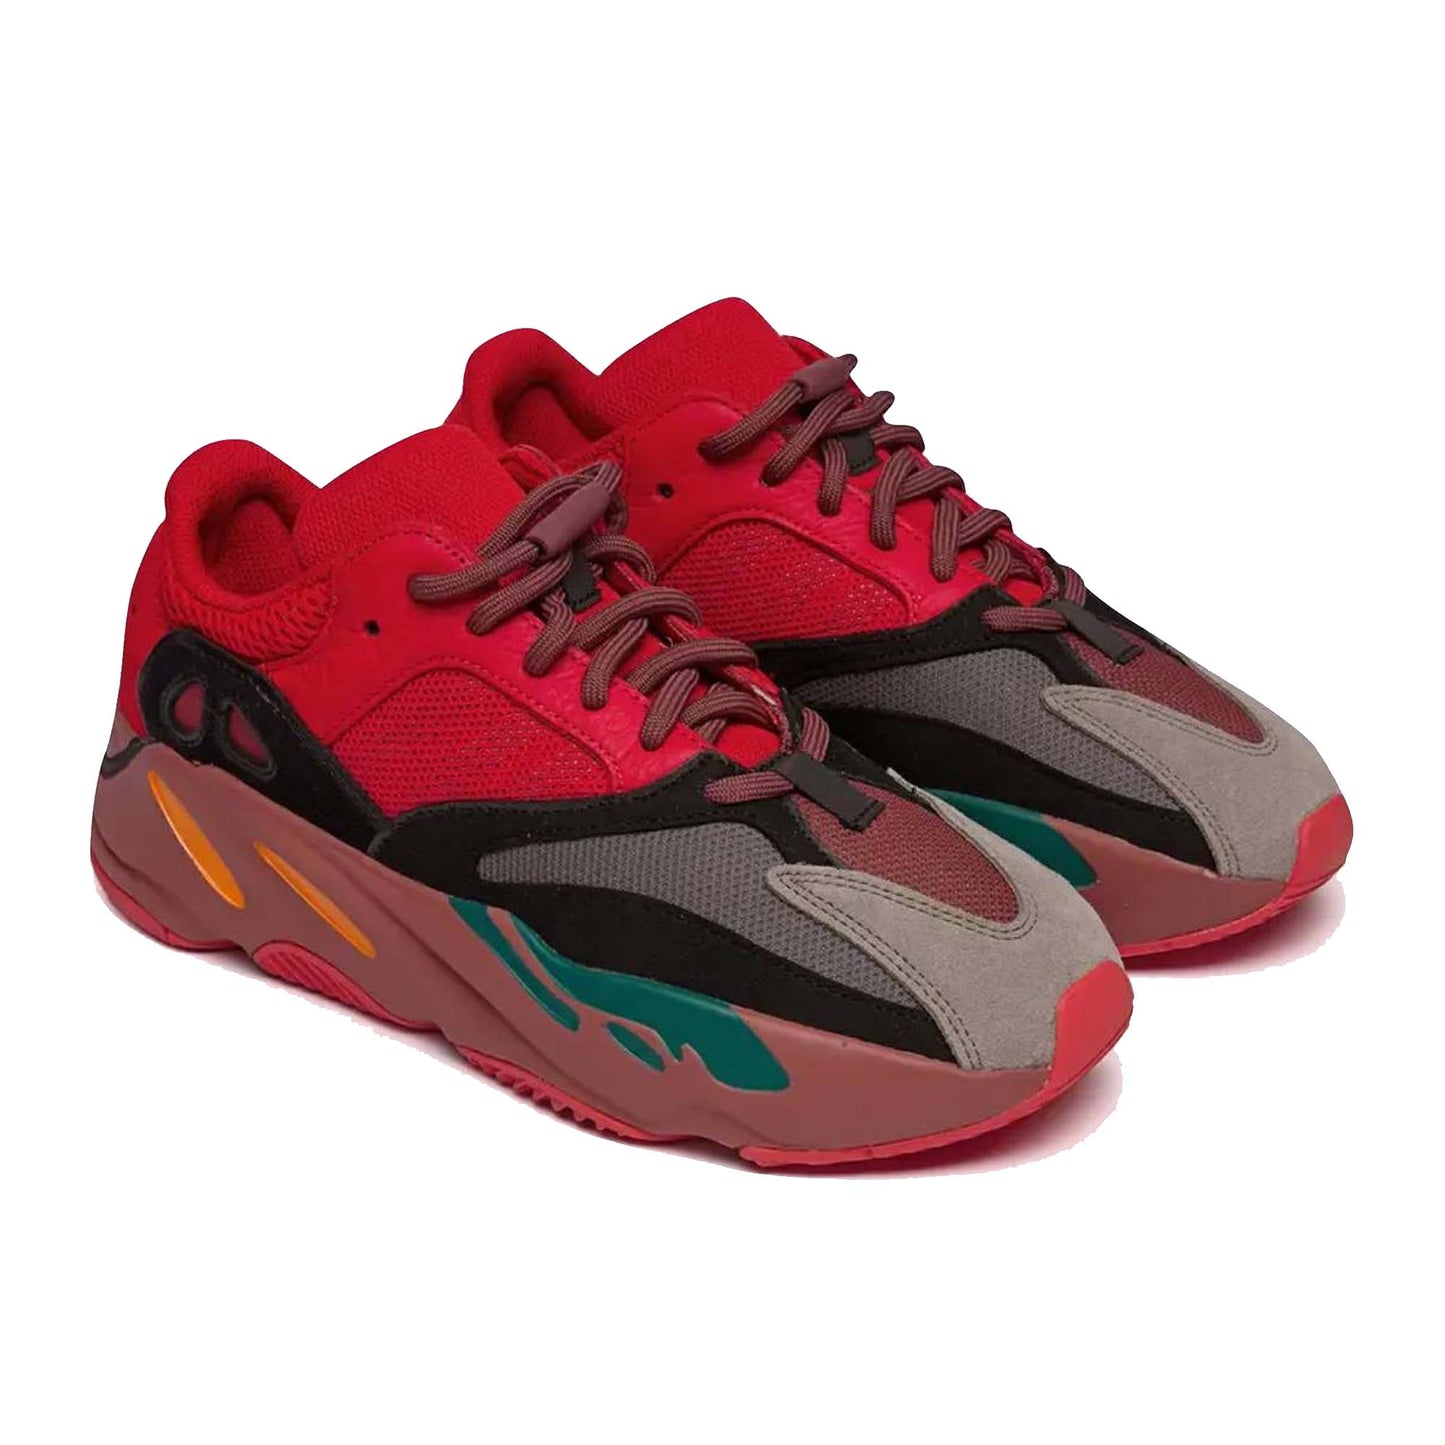 Adidas Yeezy Boost 700 "Hi-Res Red" UK14